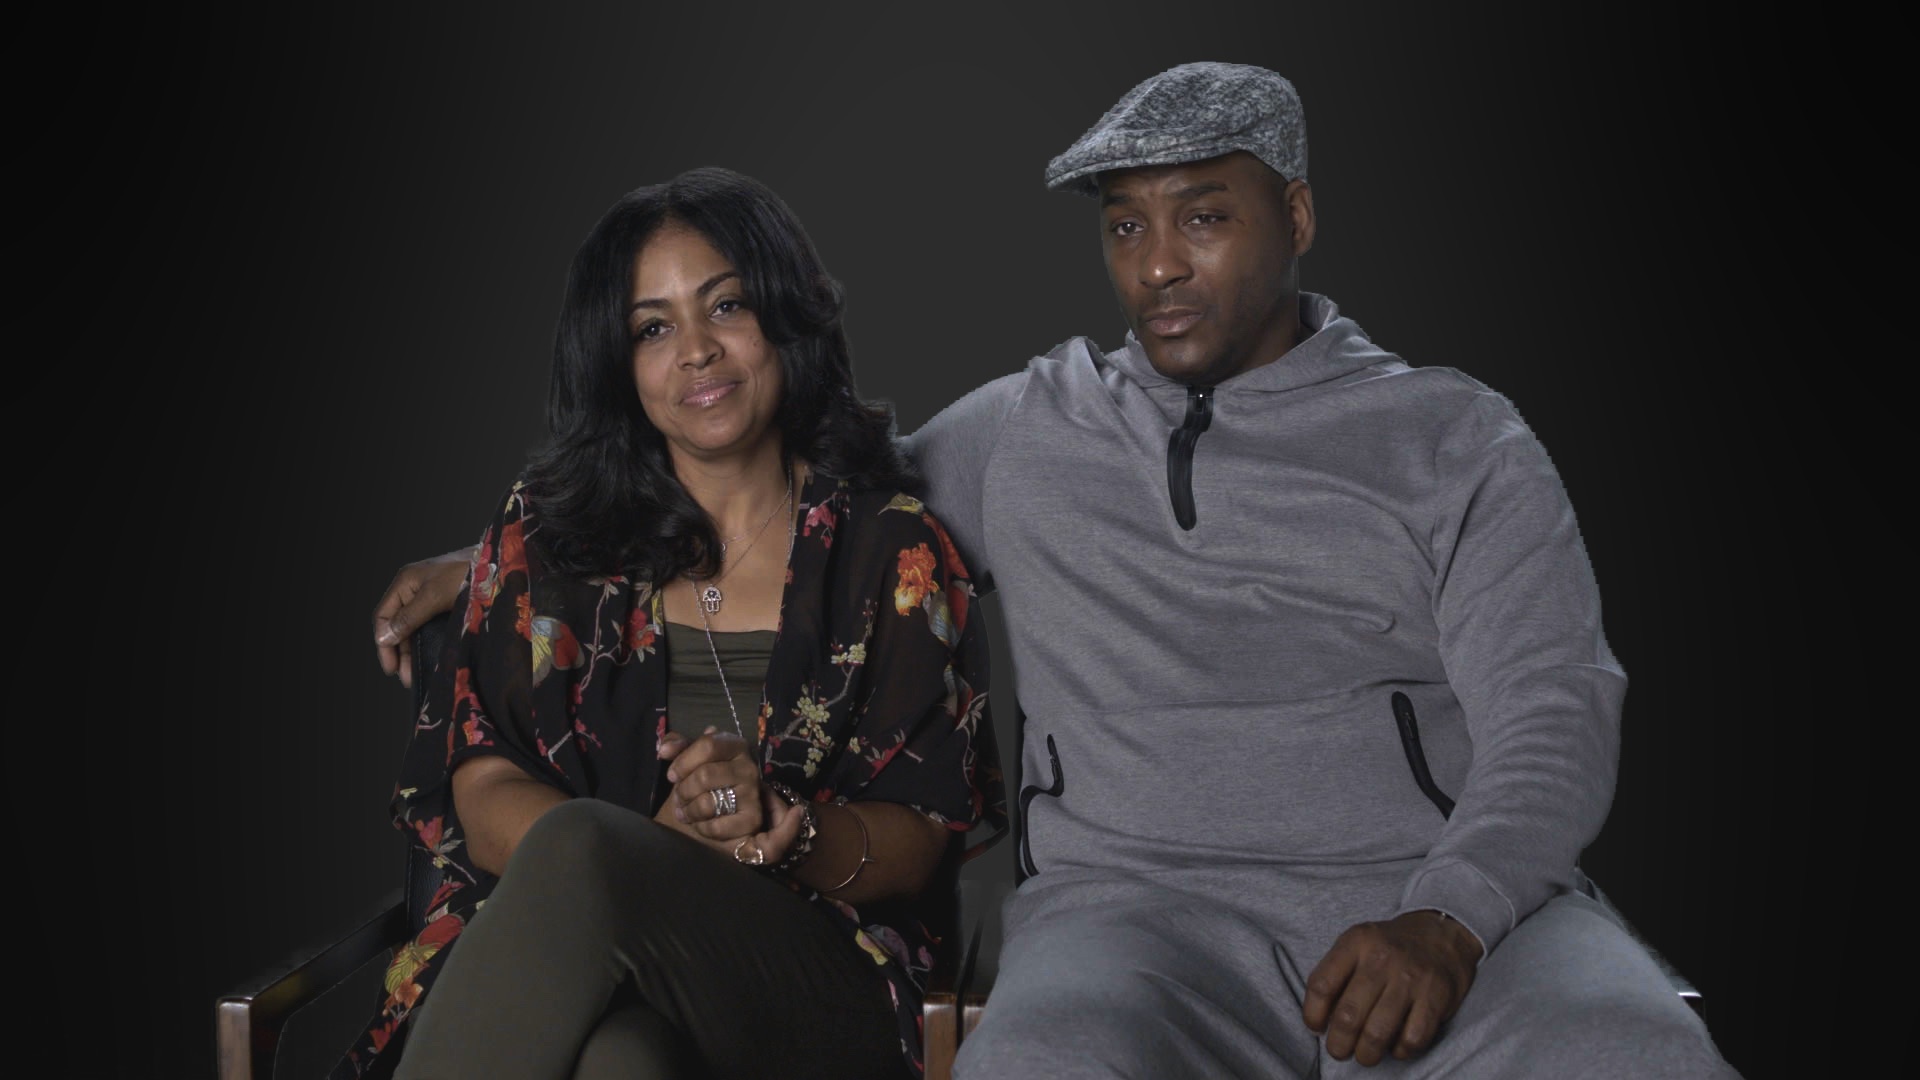 Alice Clary and Angelo Clary, the parents of Azriel Clary, in 'Surviving R. Kelly' (Courtesy of Lifetime)